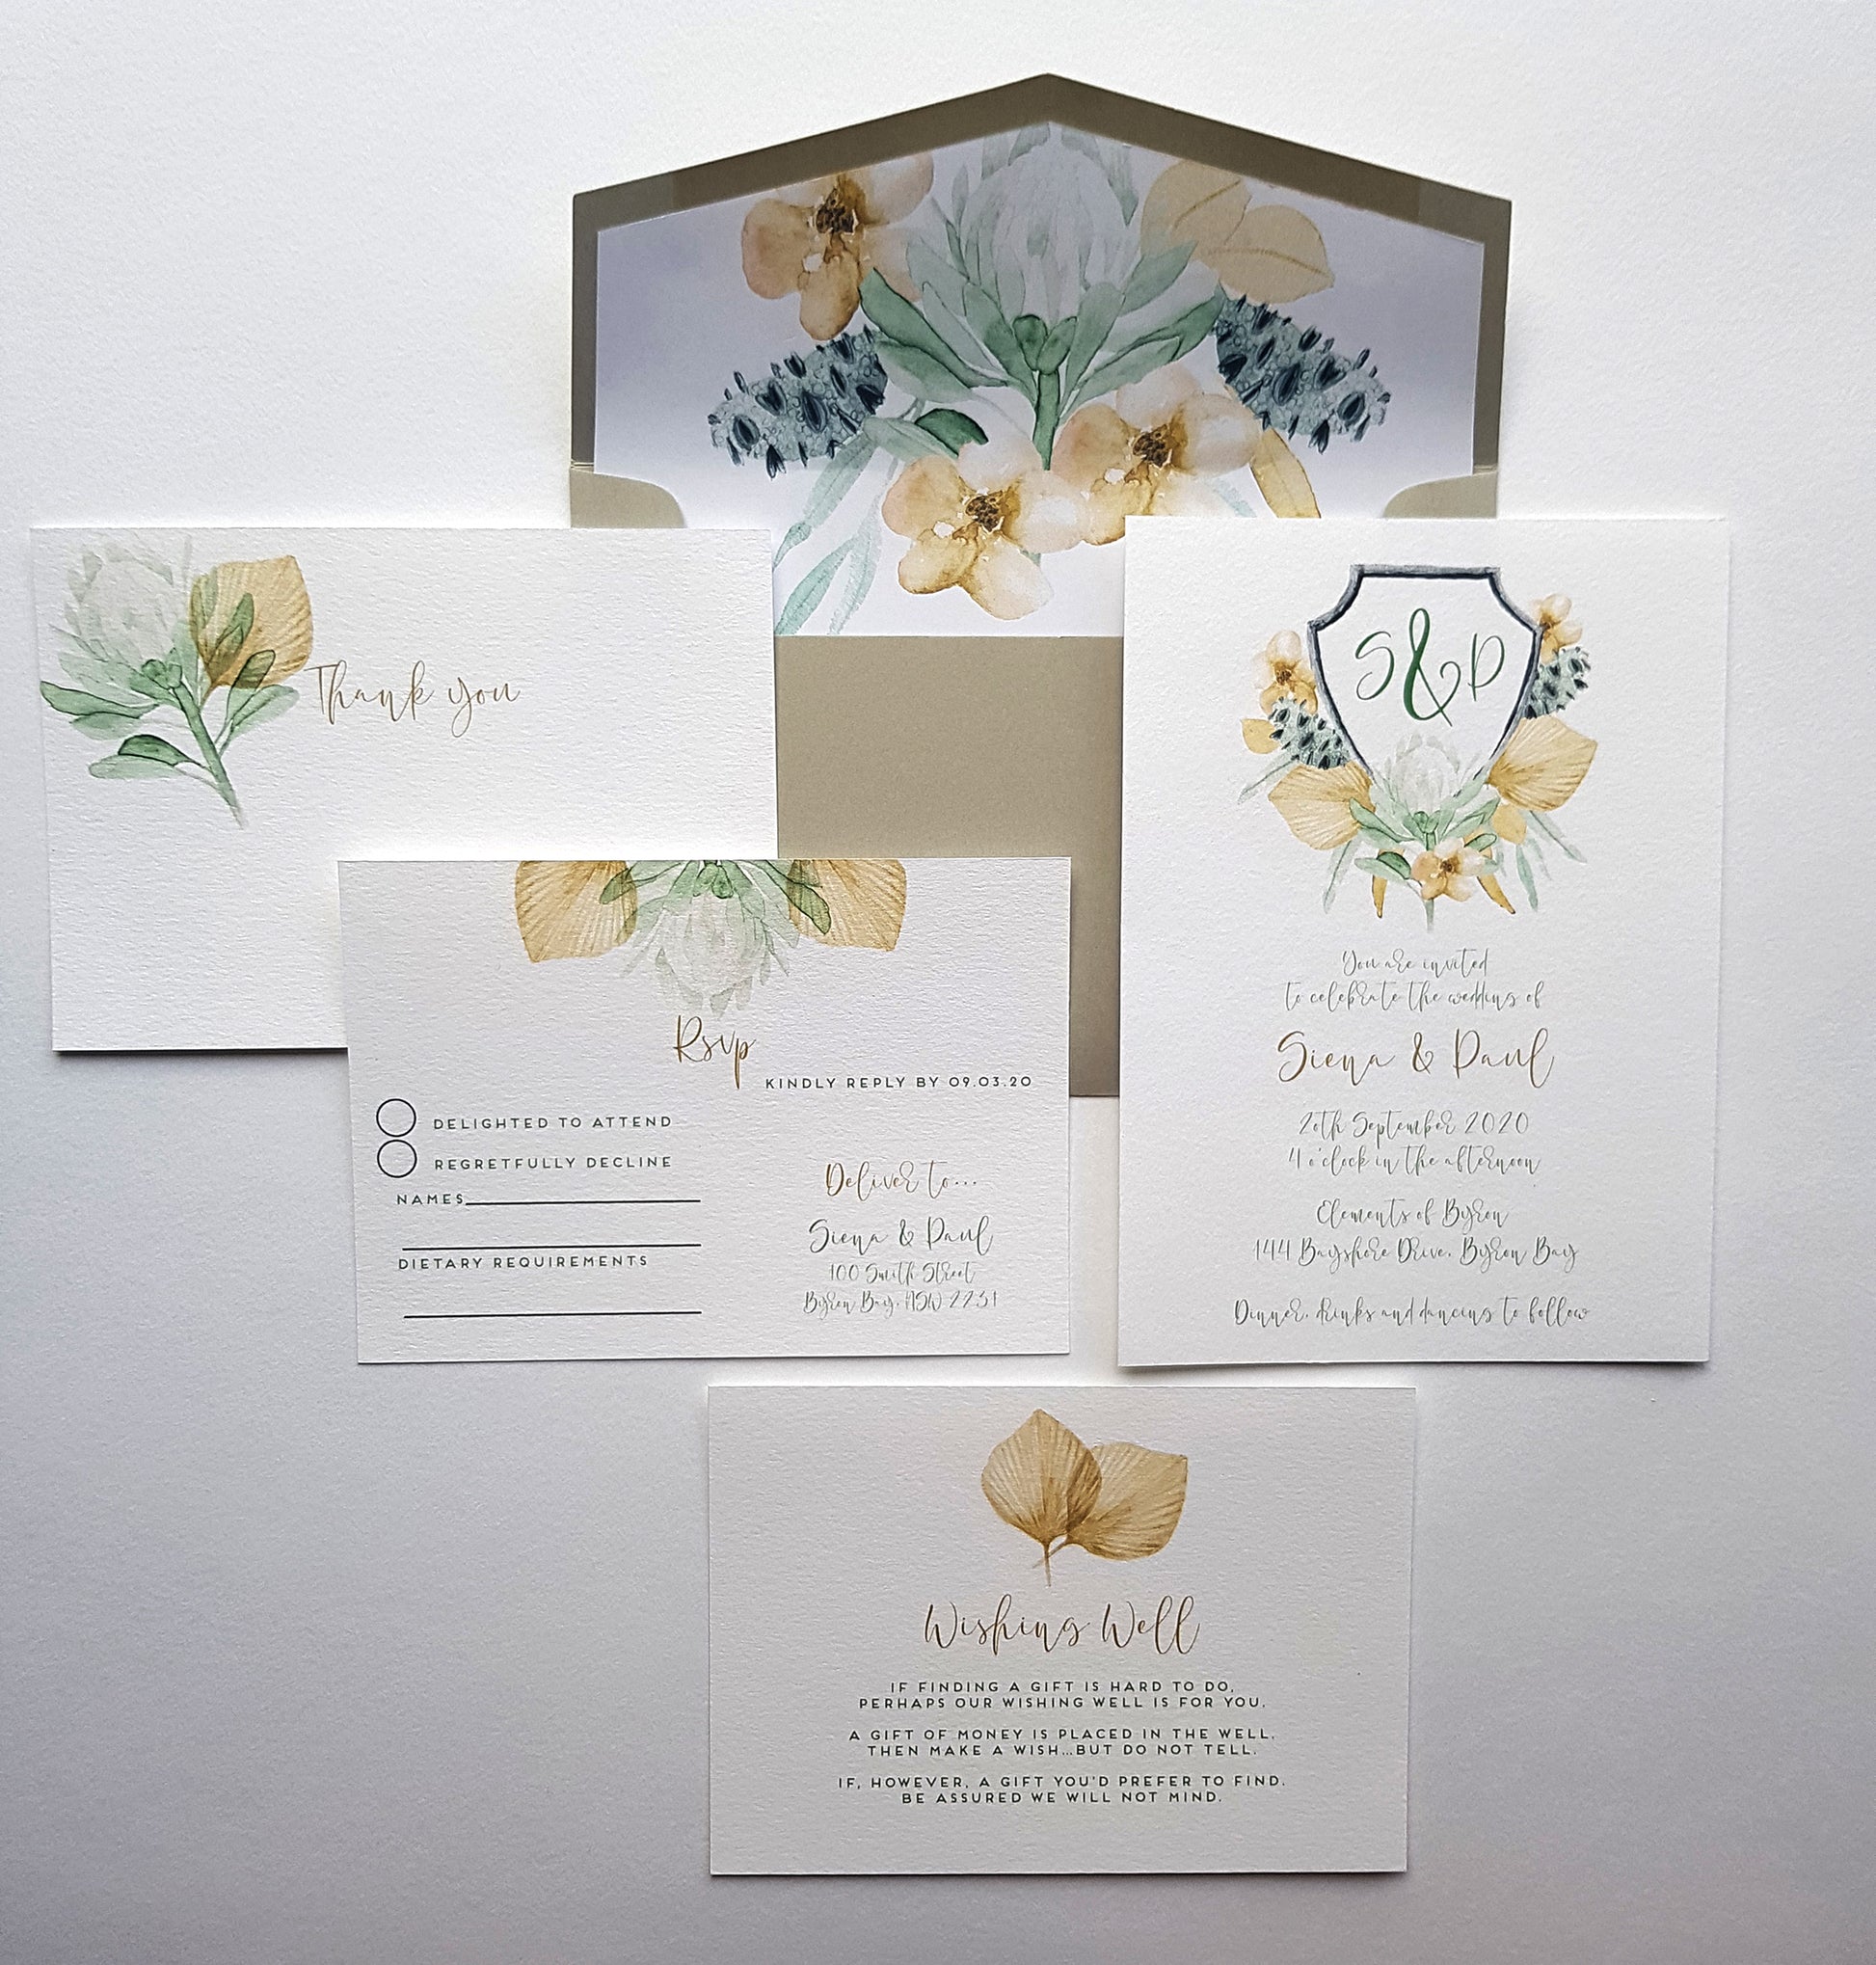 crest design, featuring invite, rsvp card, wishing well card, thank you card, with different elements from main wedding invite